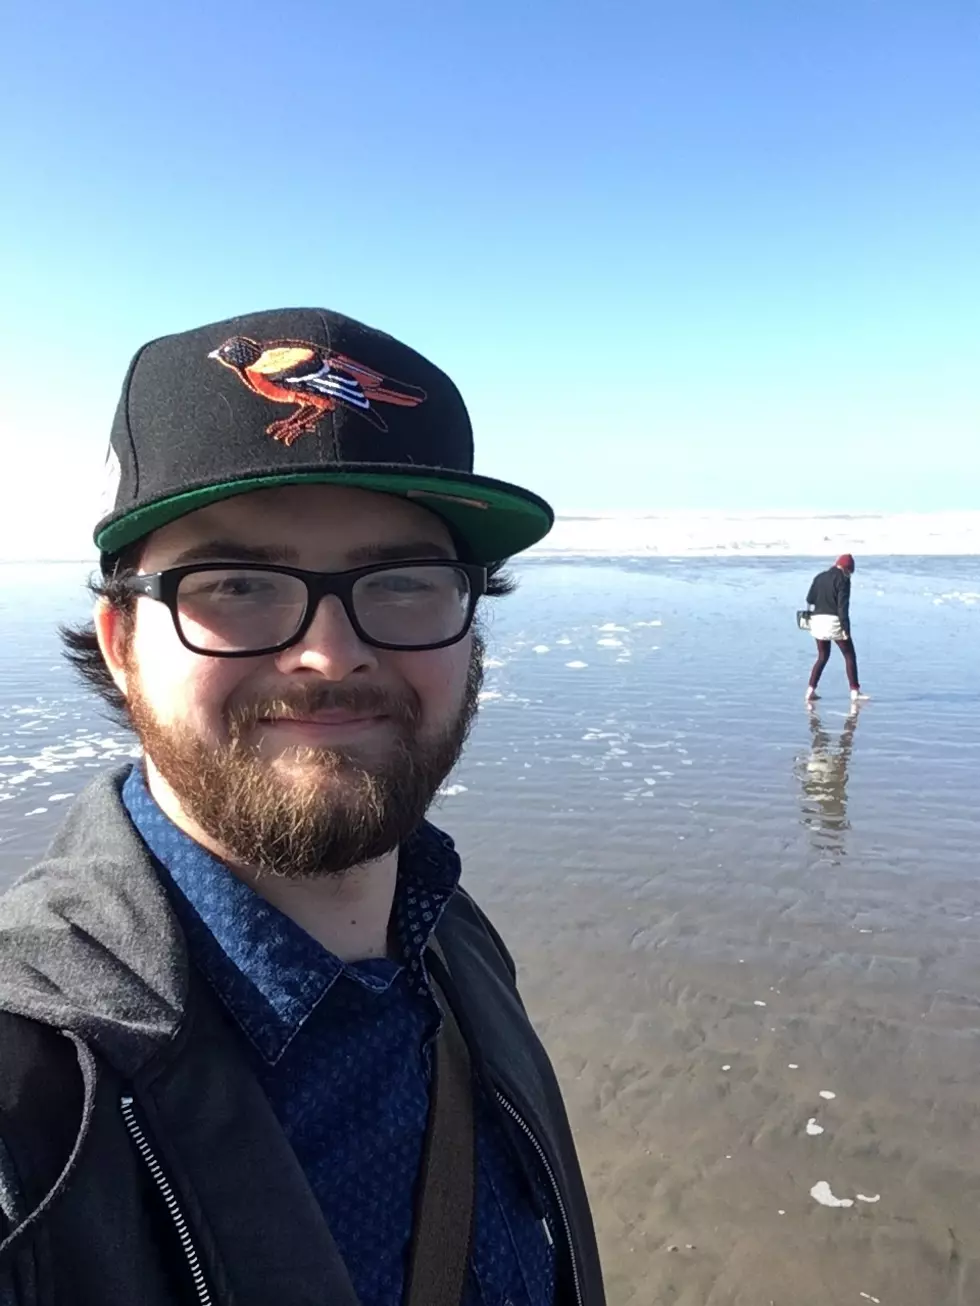 Visiting Seaside Was Magical!